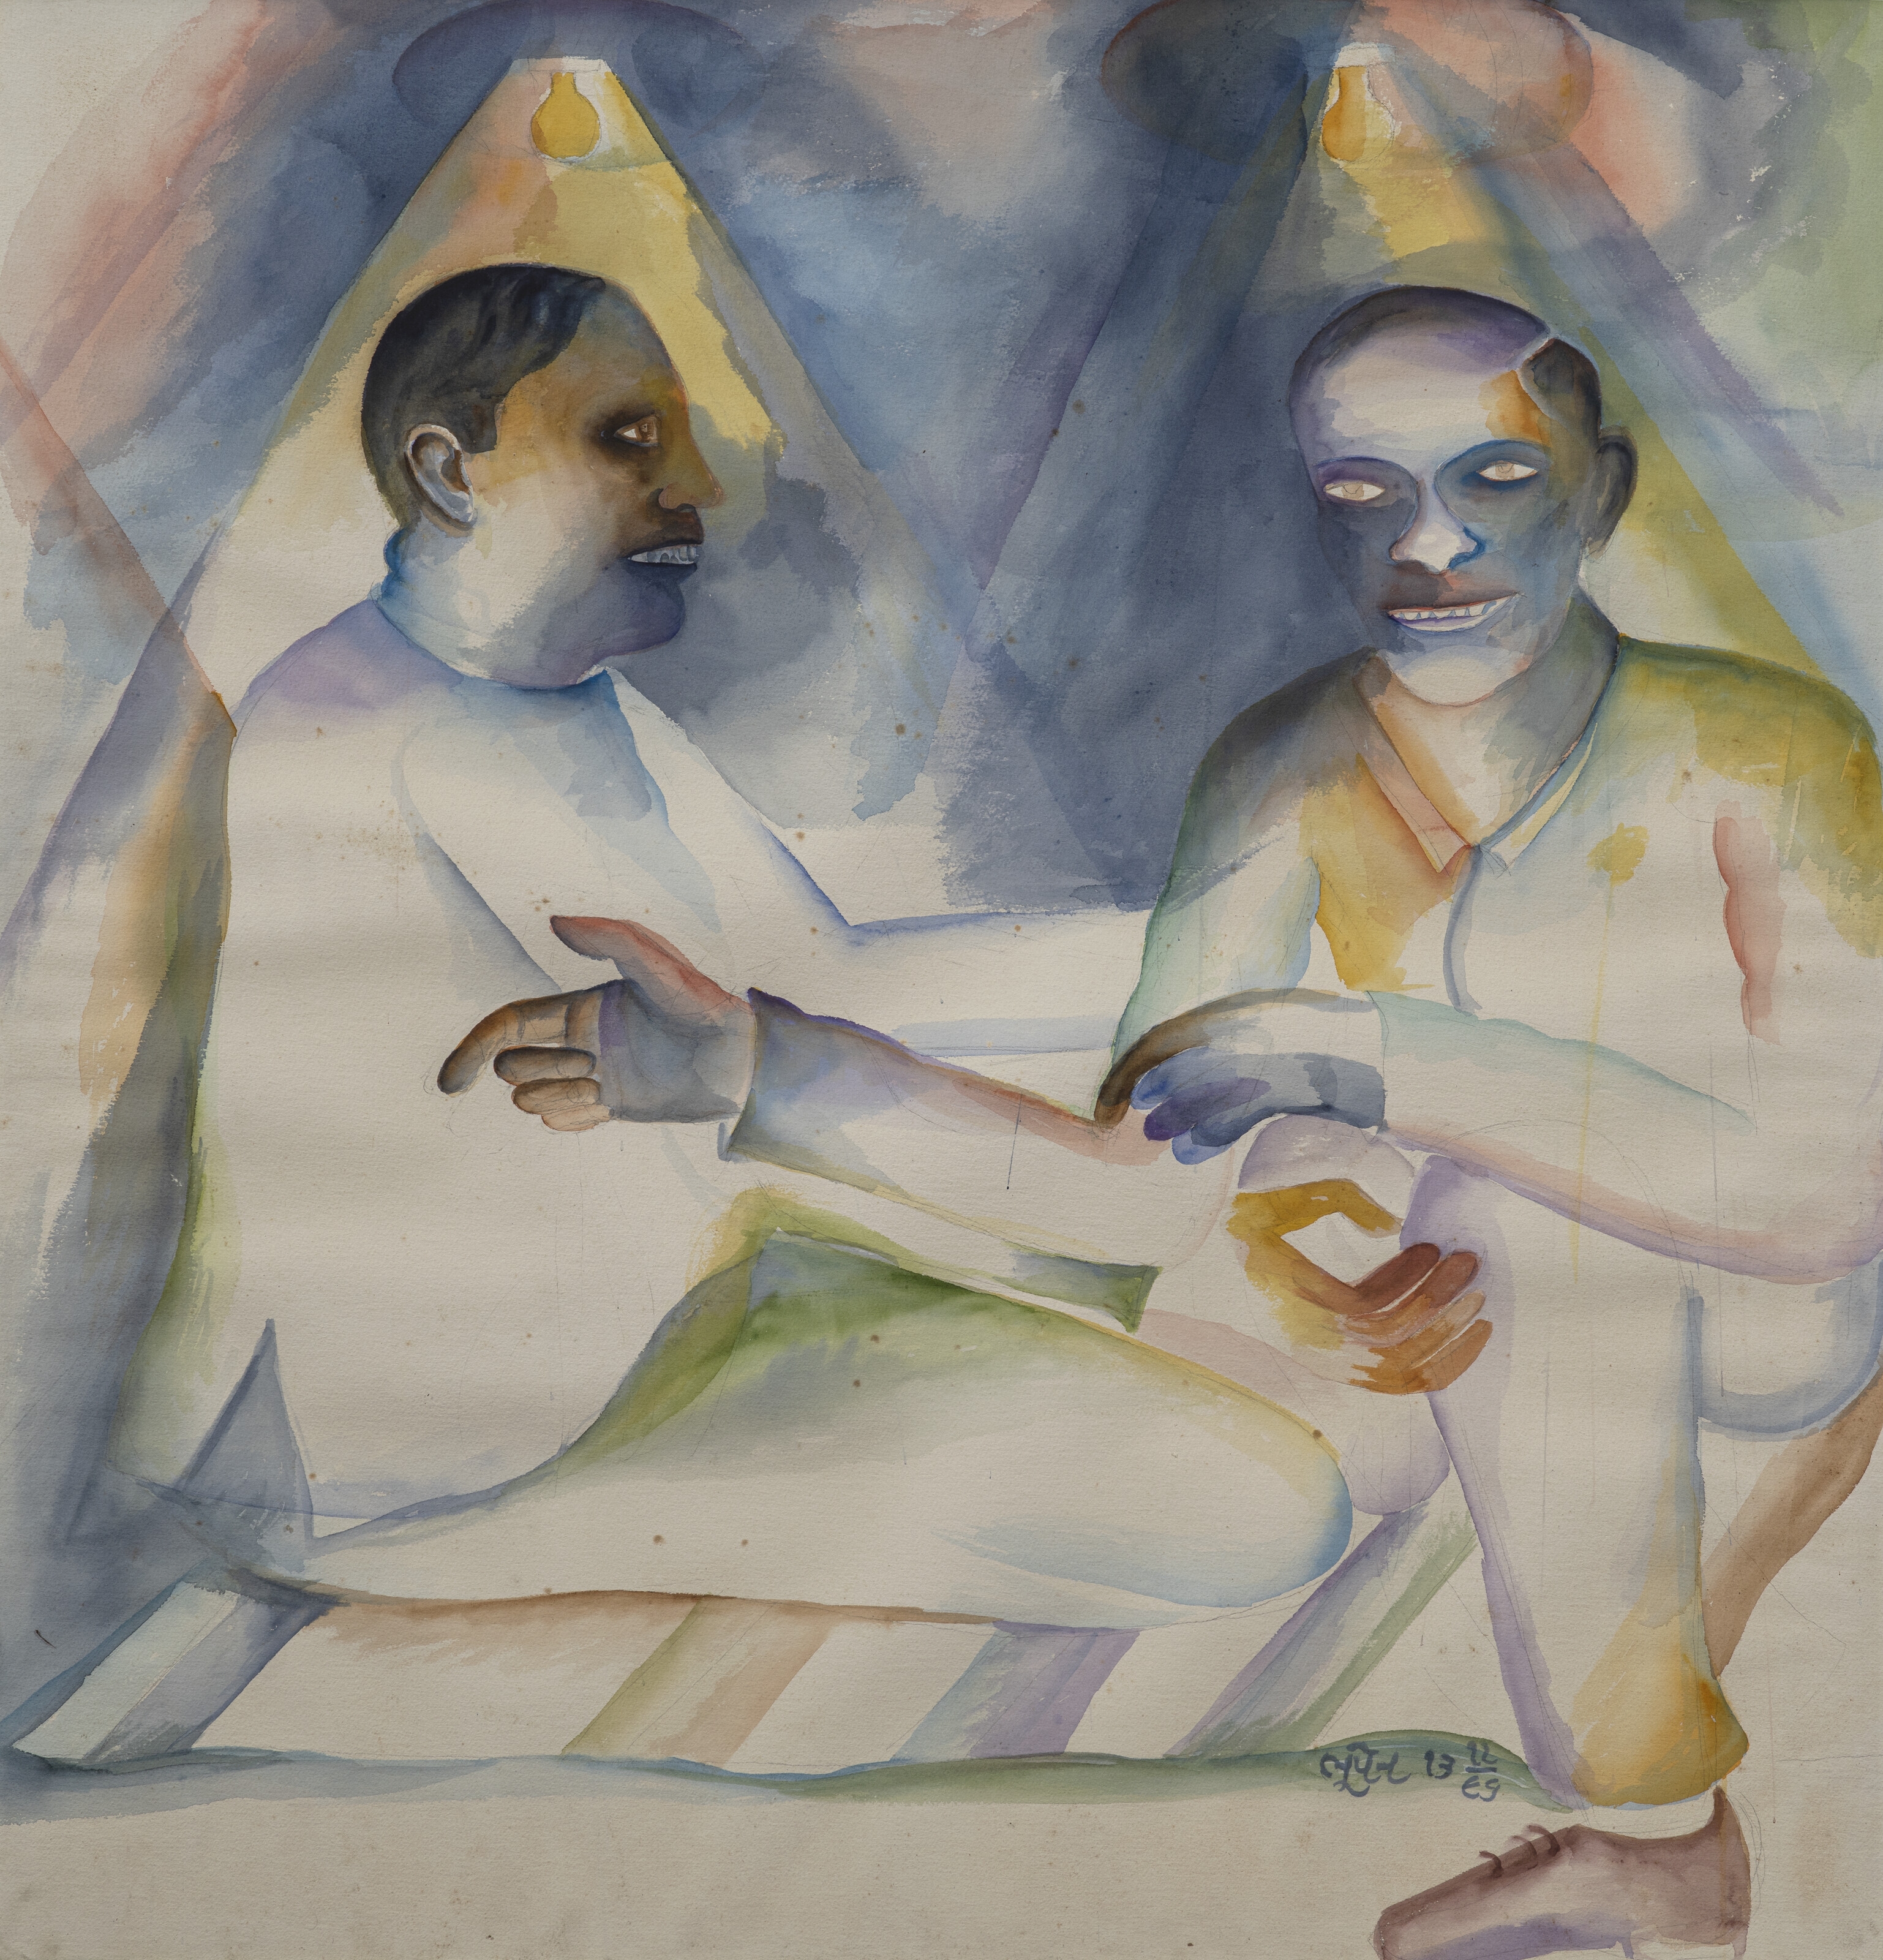 Untitled (Two Men) by Bhupen Khakhar, Executed in 1997